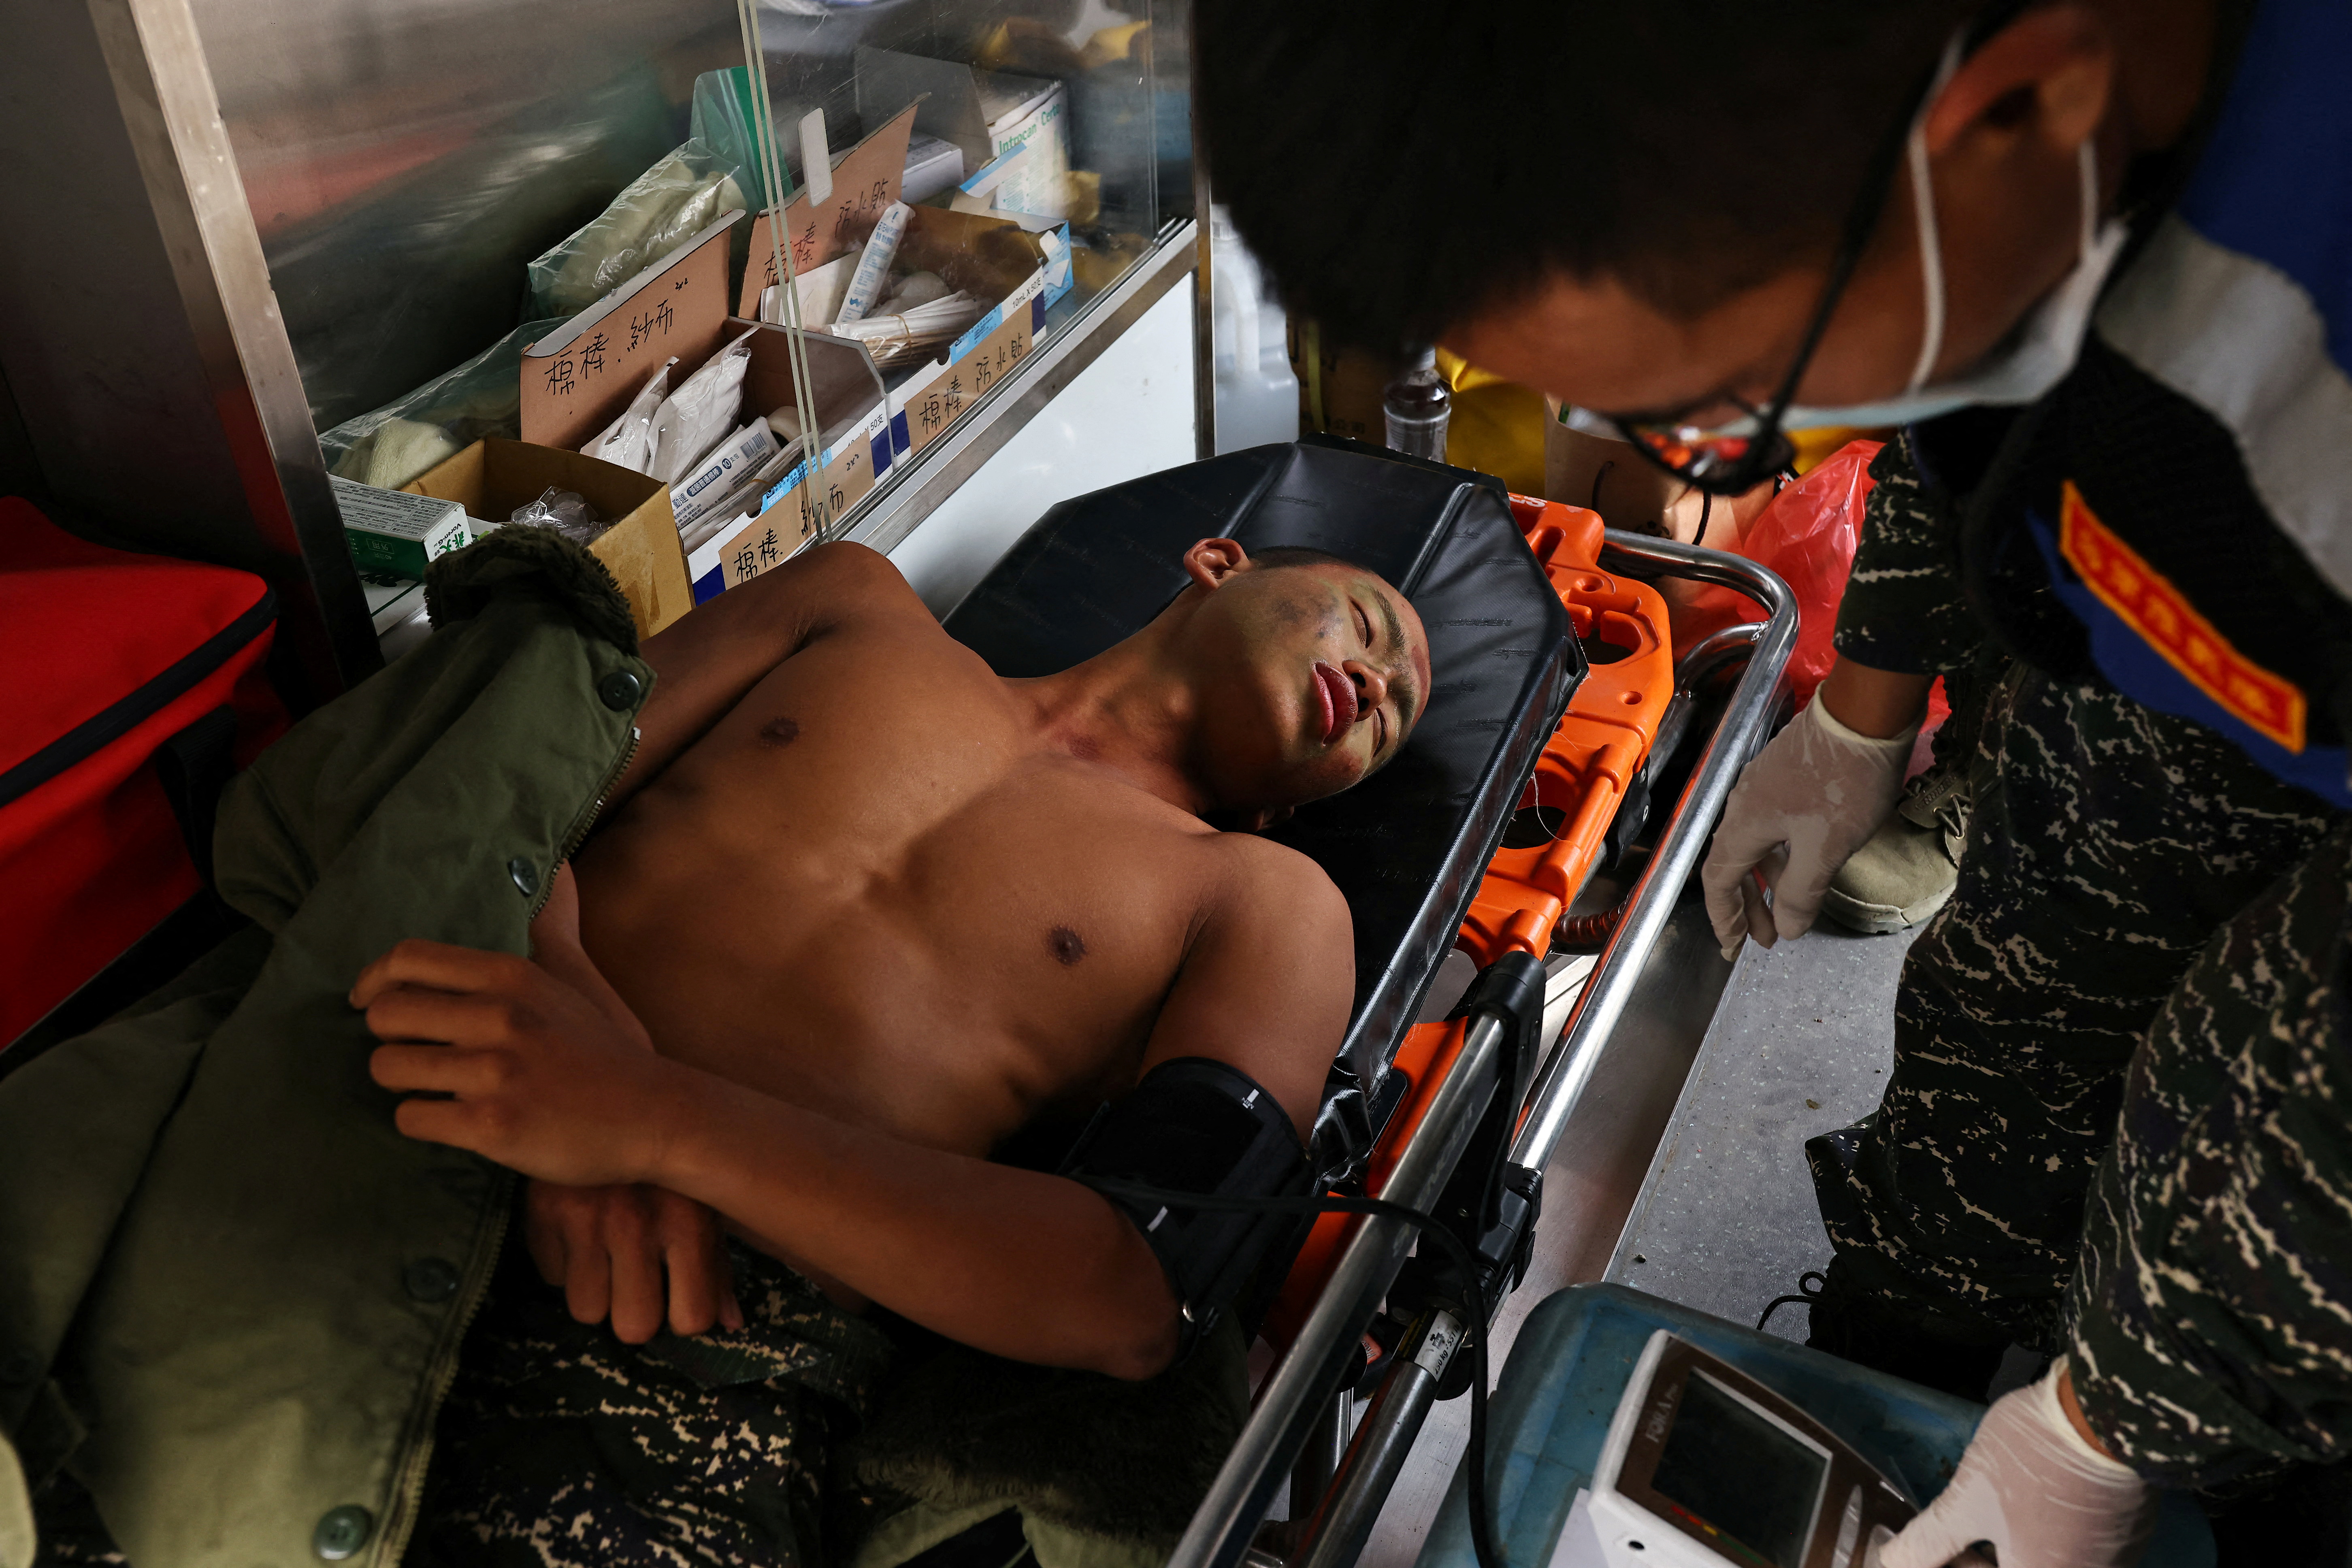 Liu Zi-Xian, 25, has his blood pressure measured in an ambulance after falling ill during the last week of a ten week program to become a member of the Taiwan navy's elite Amphibious Reconnaissance and Patrol unit, at Zuoying navy base, Kaohsiung, southern Taiwan, December 19, 2021. The trainees have to endure everything from long marches to hours in the water, with constant screaming at by their instructors. Of the group of 31 who started the program, only 15 finished.   REUTERS/Ann Wang      